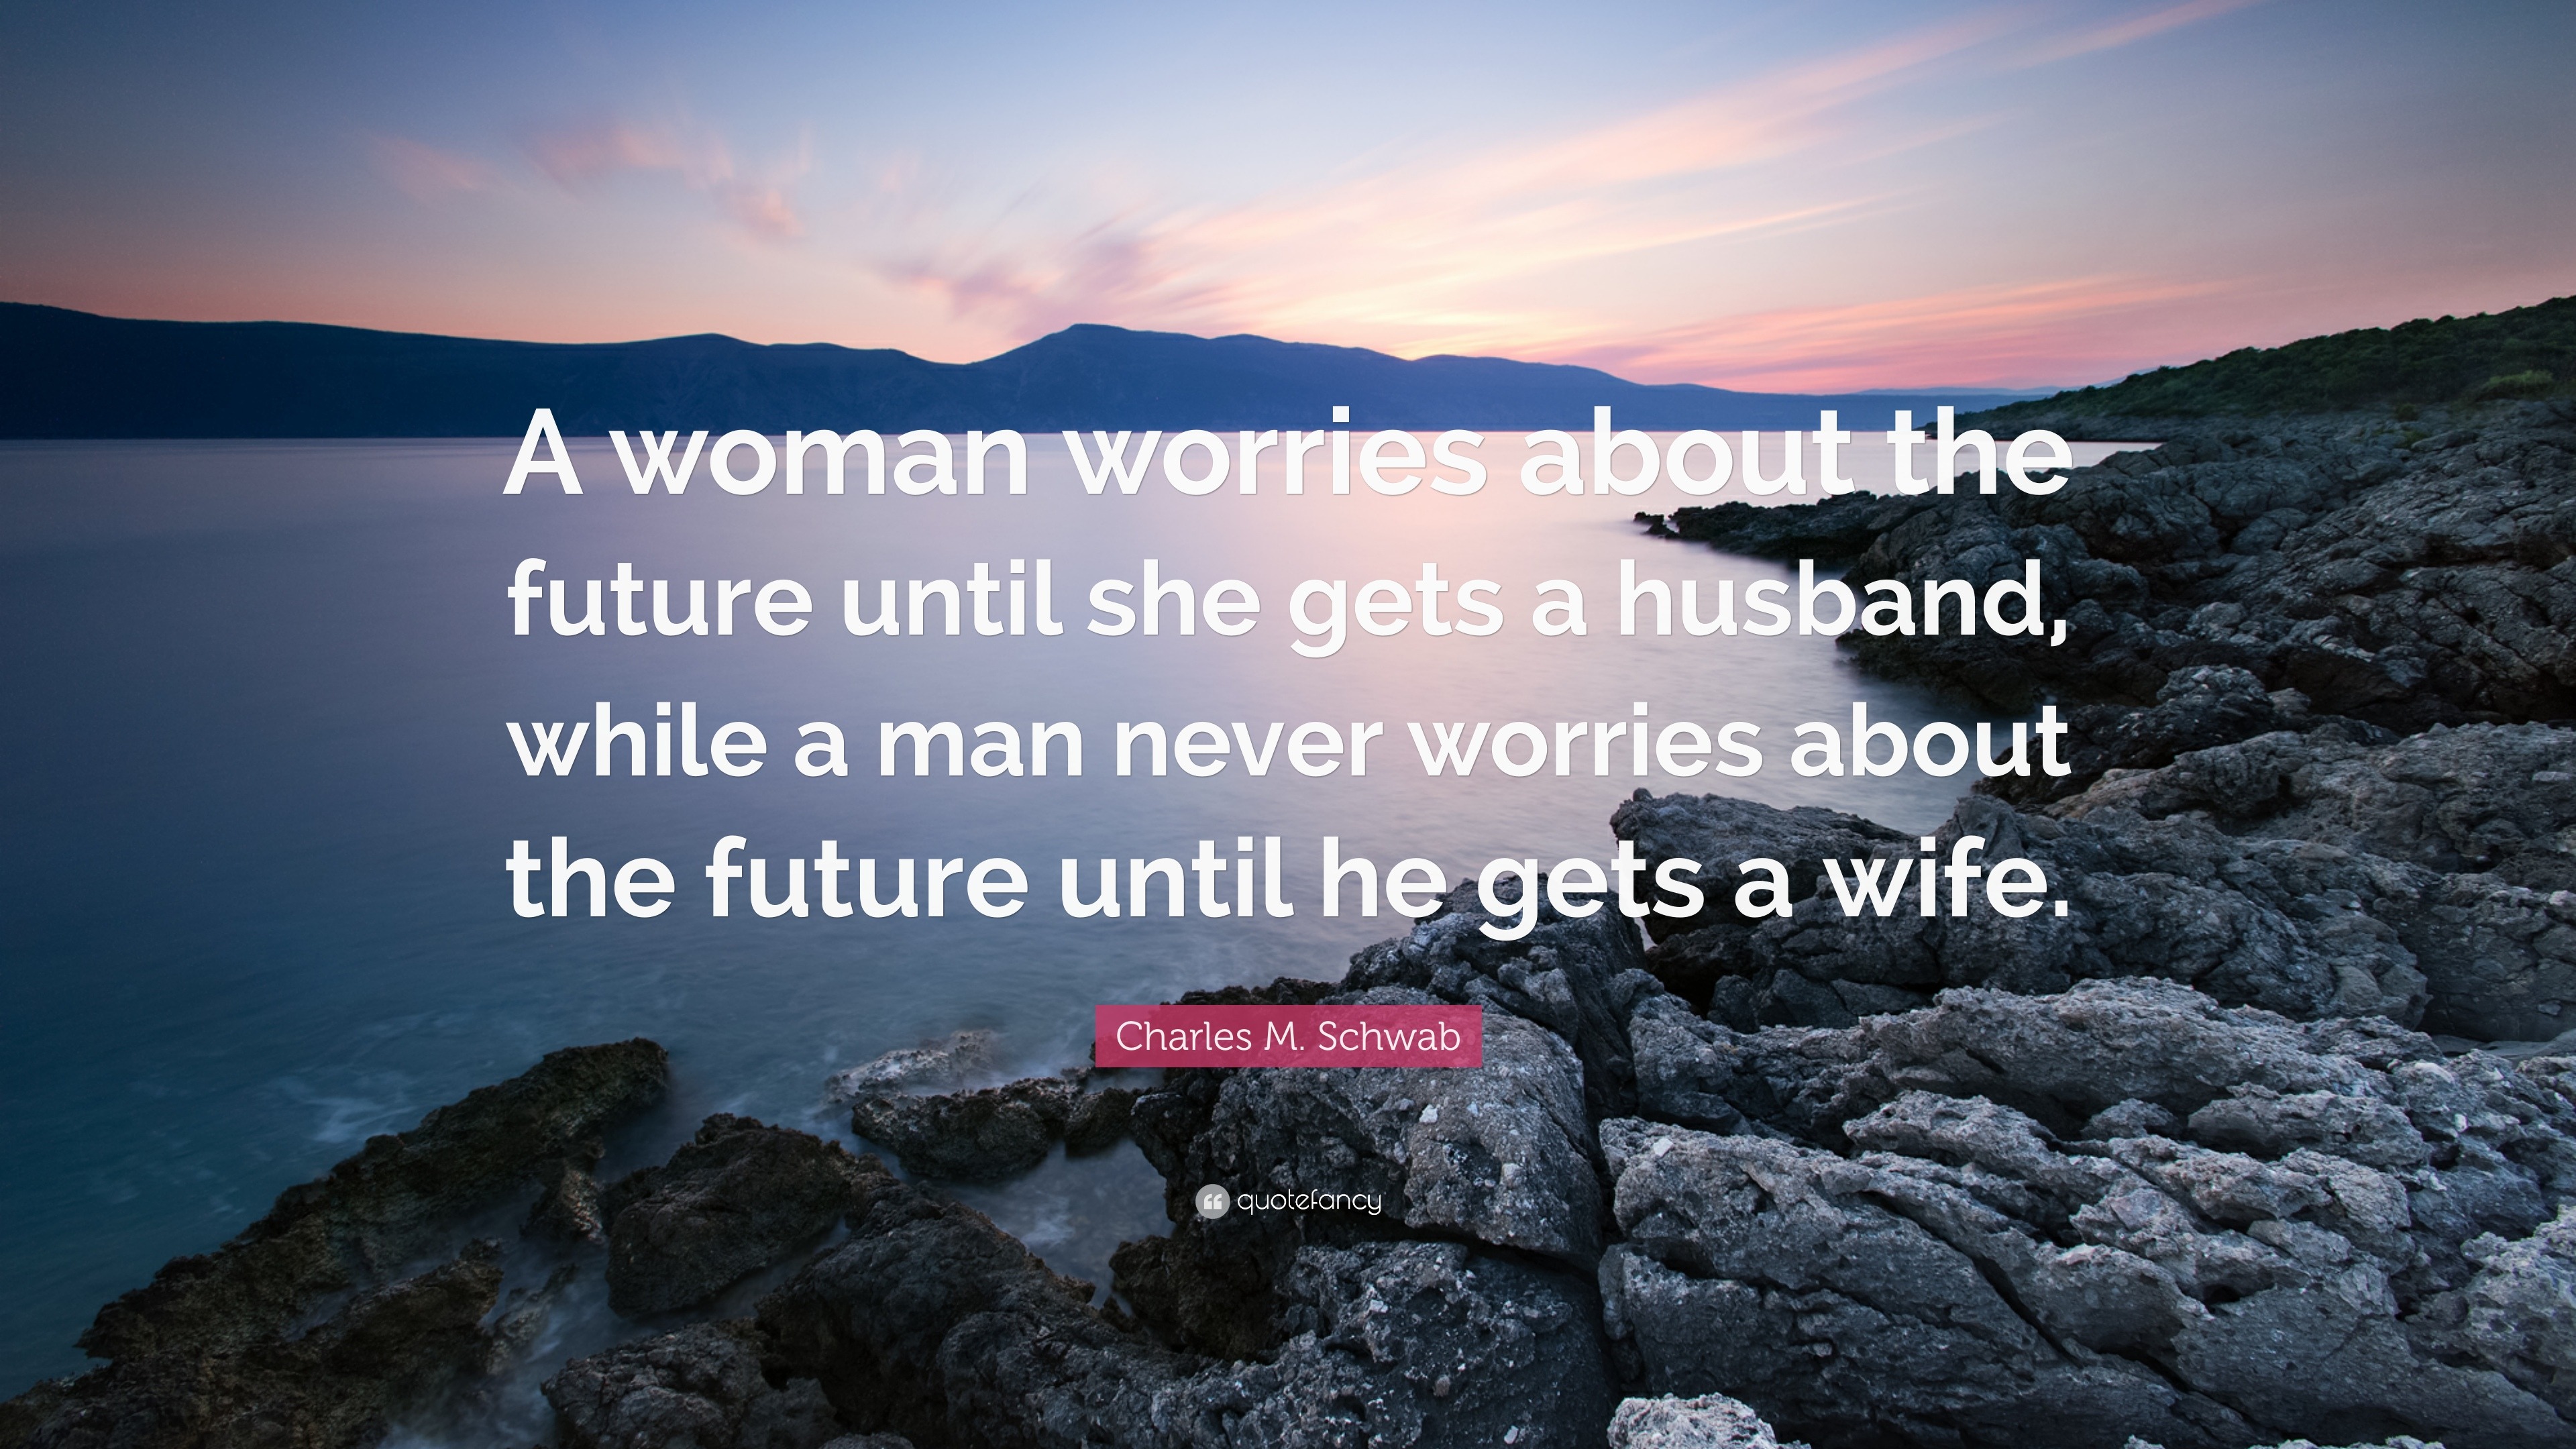 Charles M. Schwab Quote: “A woman worries about the future ...